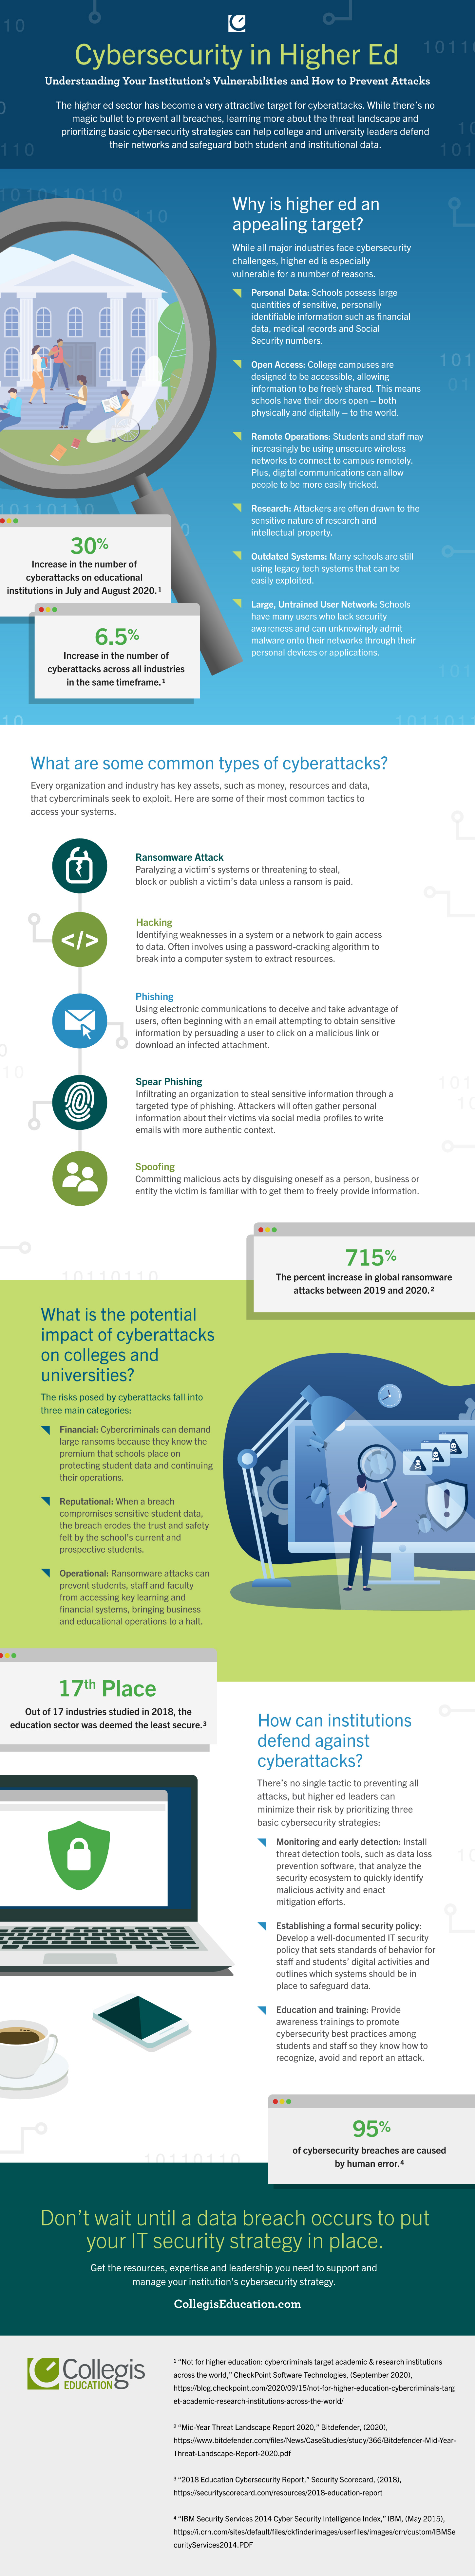 Cybersecurity in Higher Ed infographic